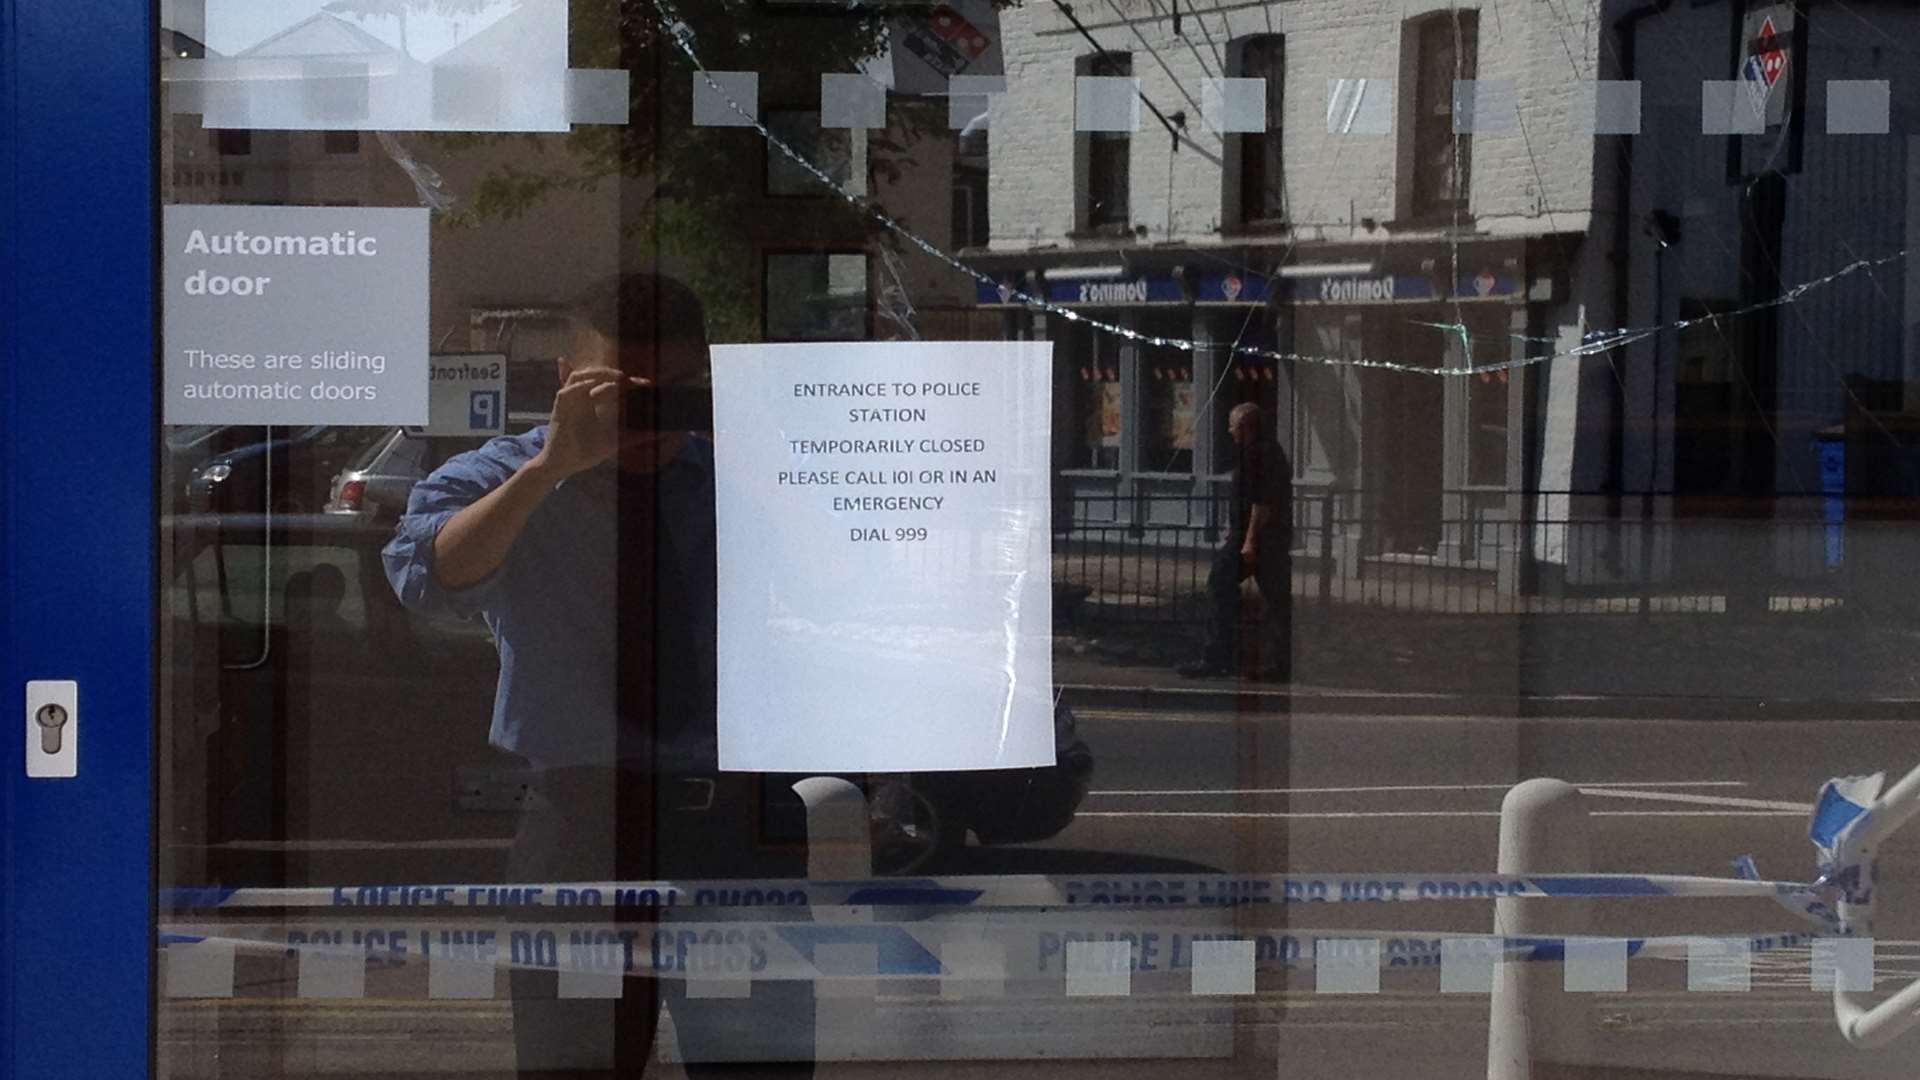 The sign on the window after the vandalism attack at Sheerness police station